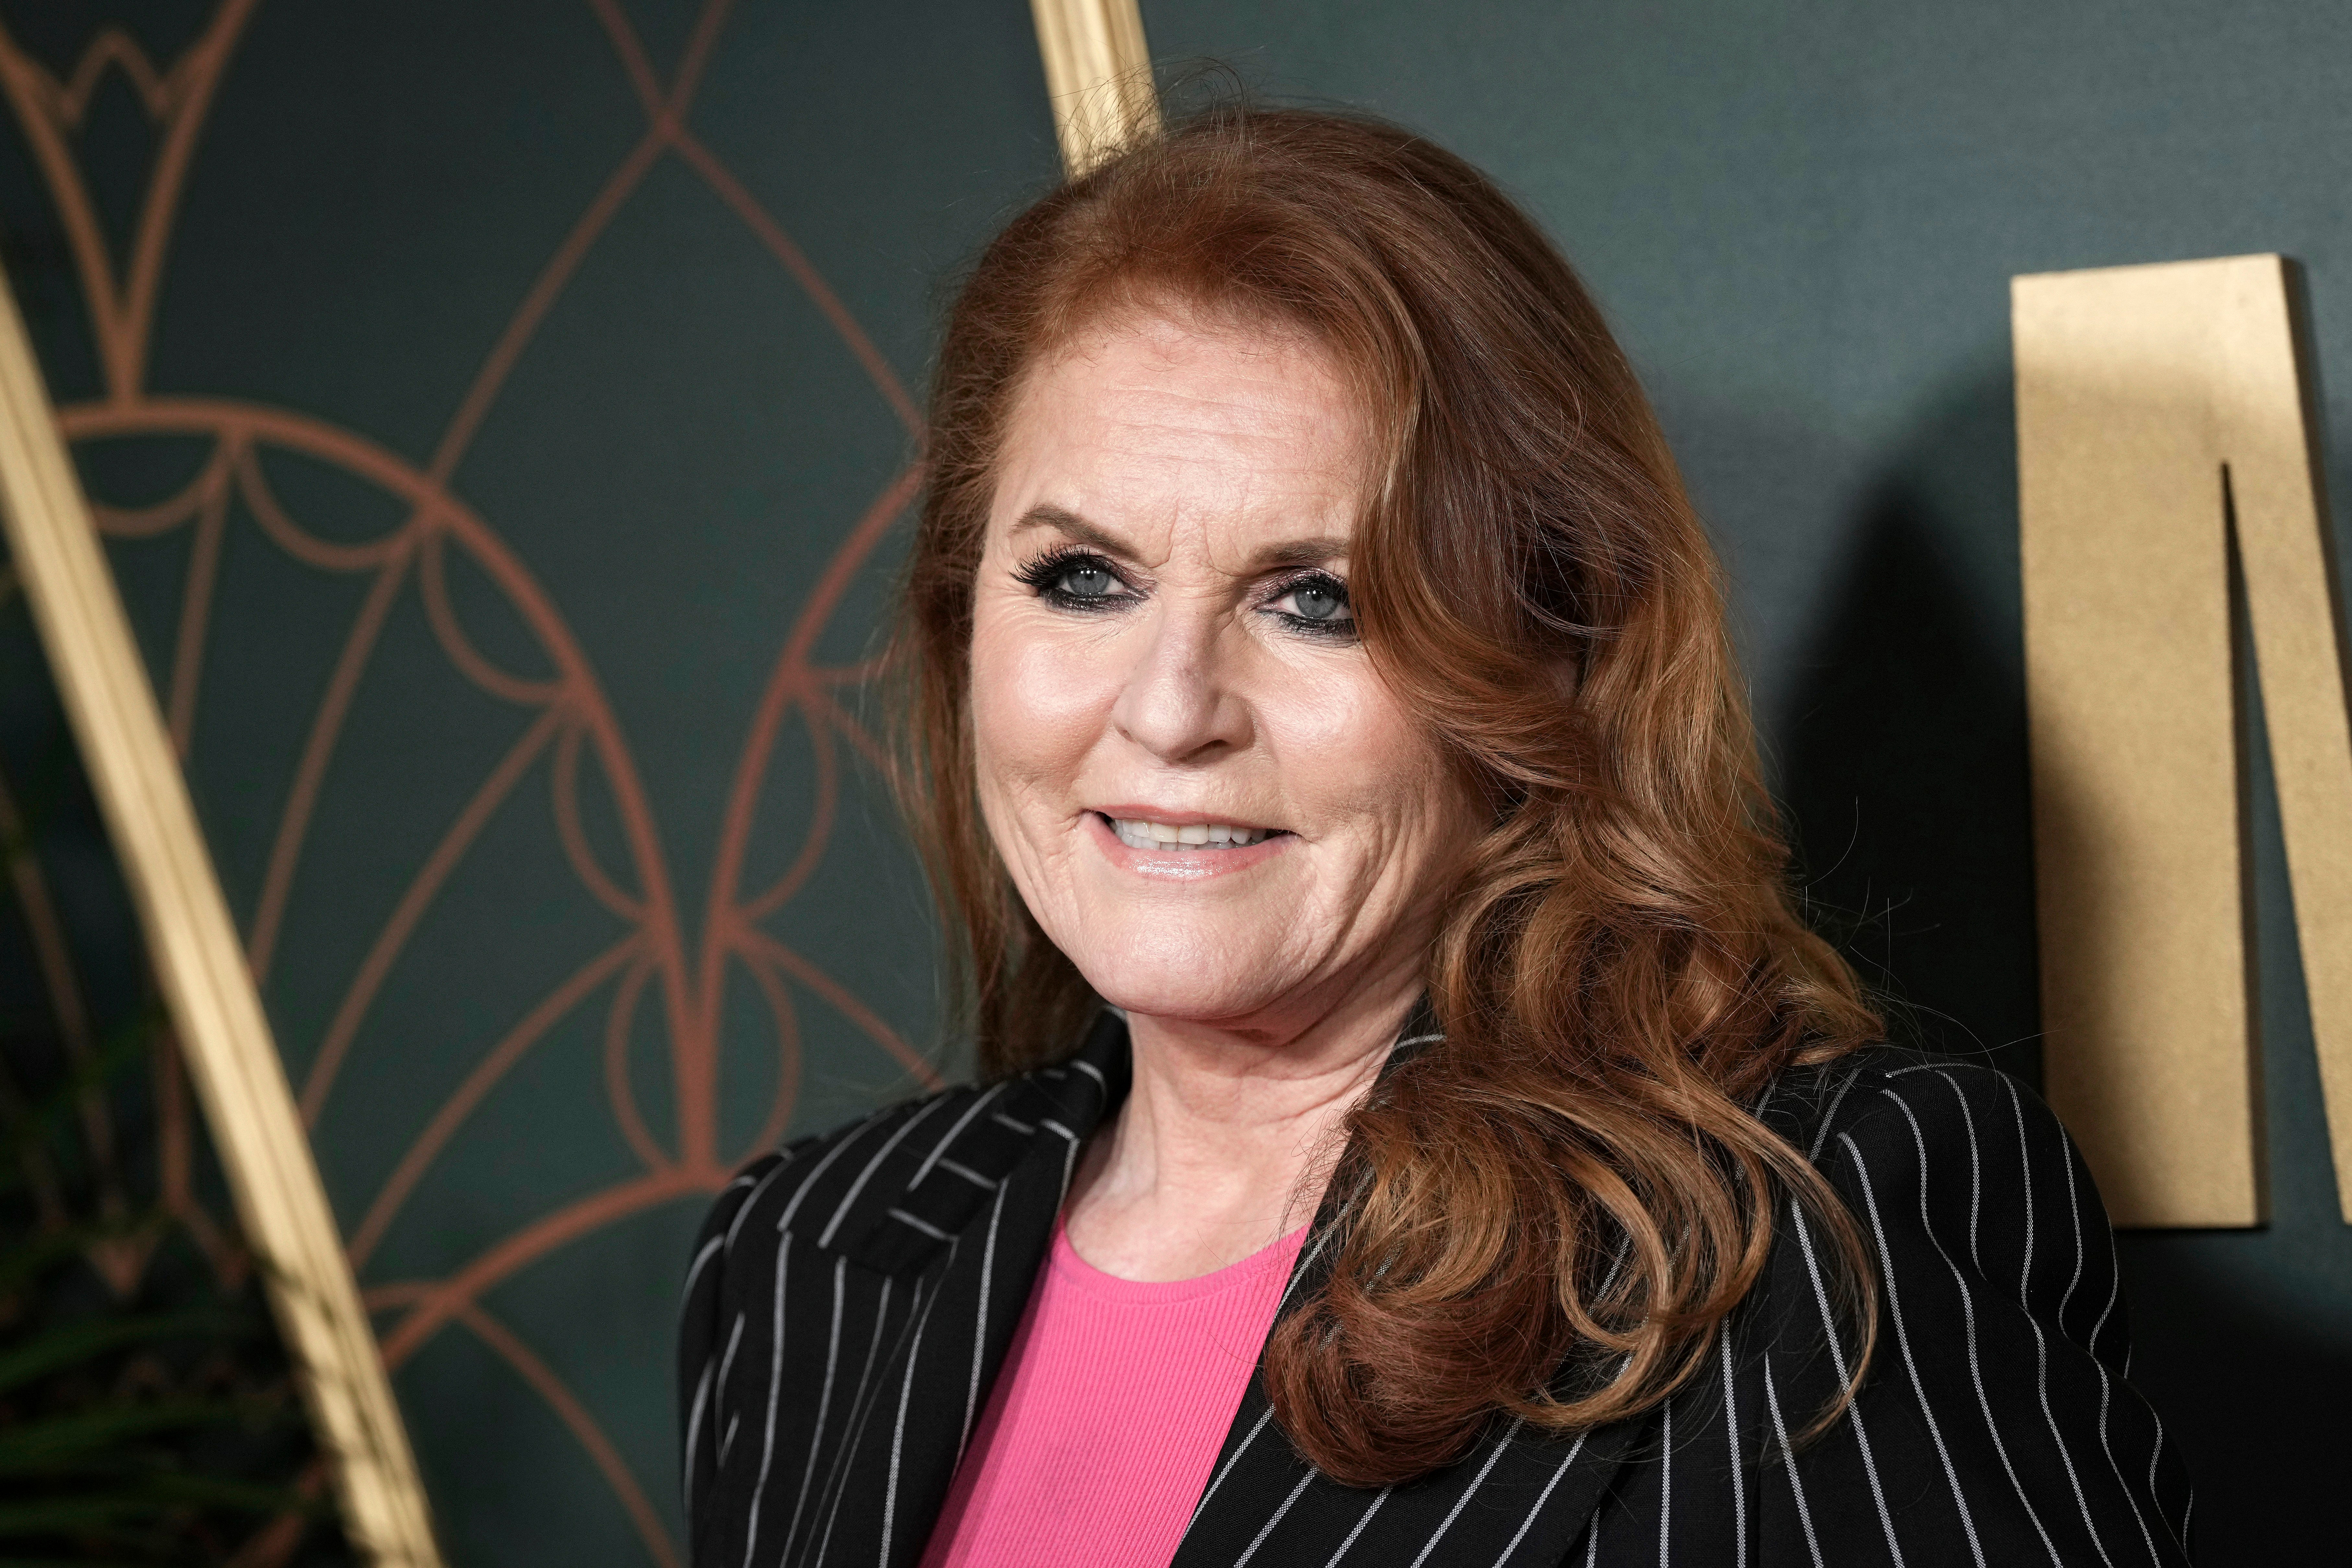 Sarah Ferguson is talking about going to Wales and Scotland to climb mountains after her recent breast cancer diagnosis